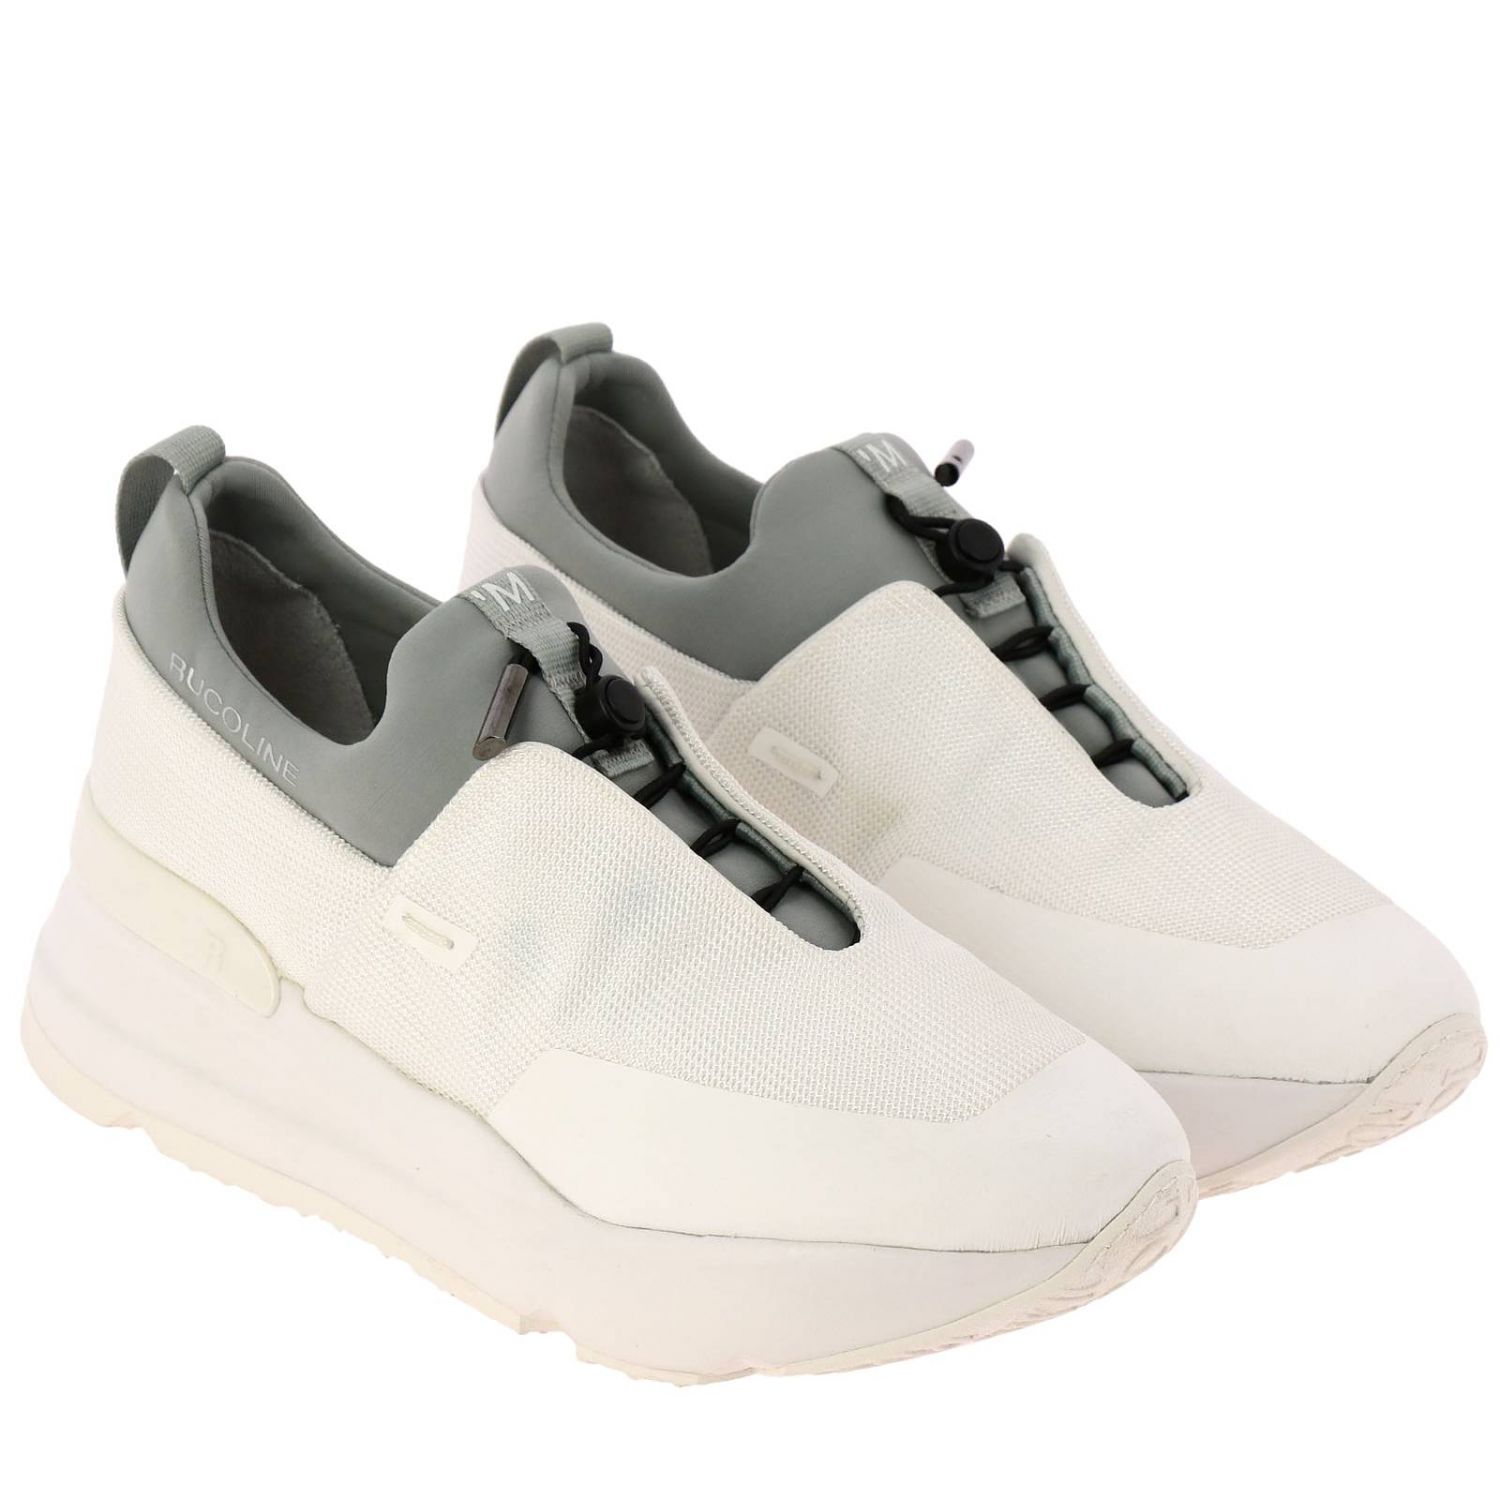 Rucoline Outlet: Shoes women | Sneakers Rucoline Women White | Sneakers ...